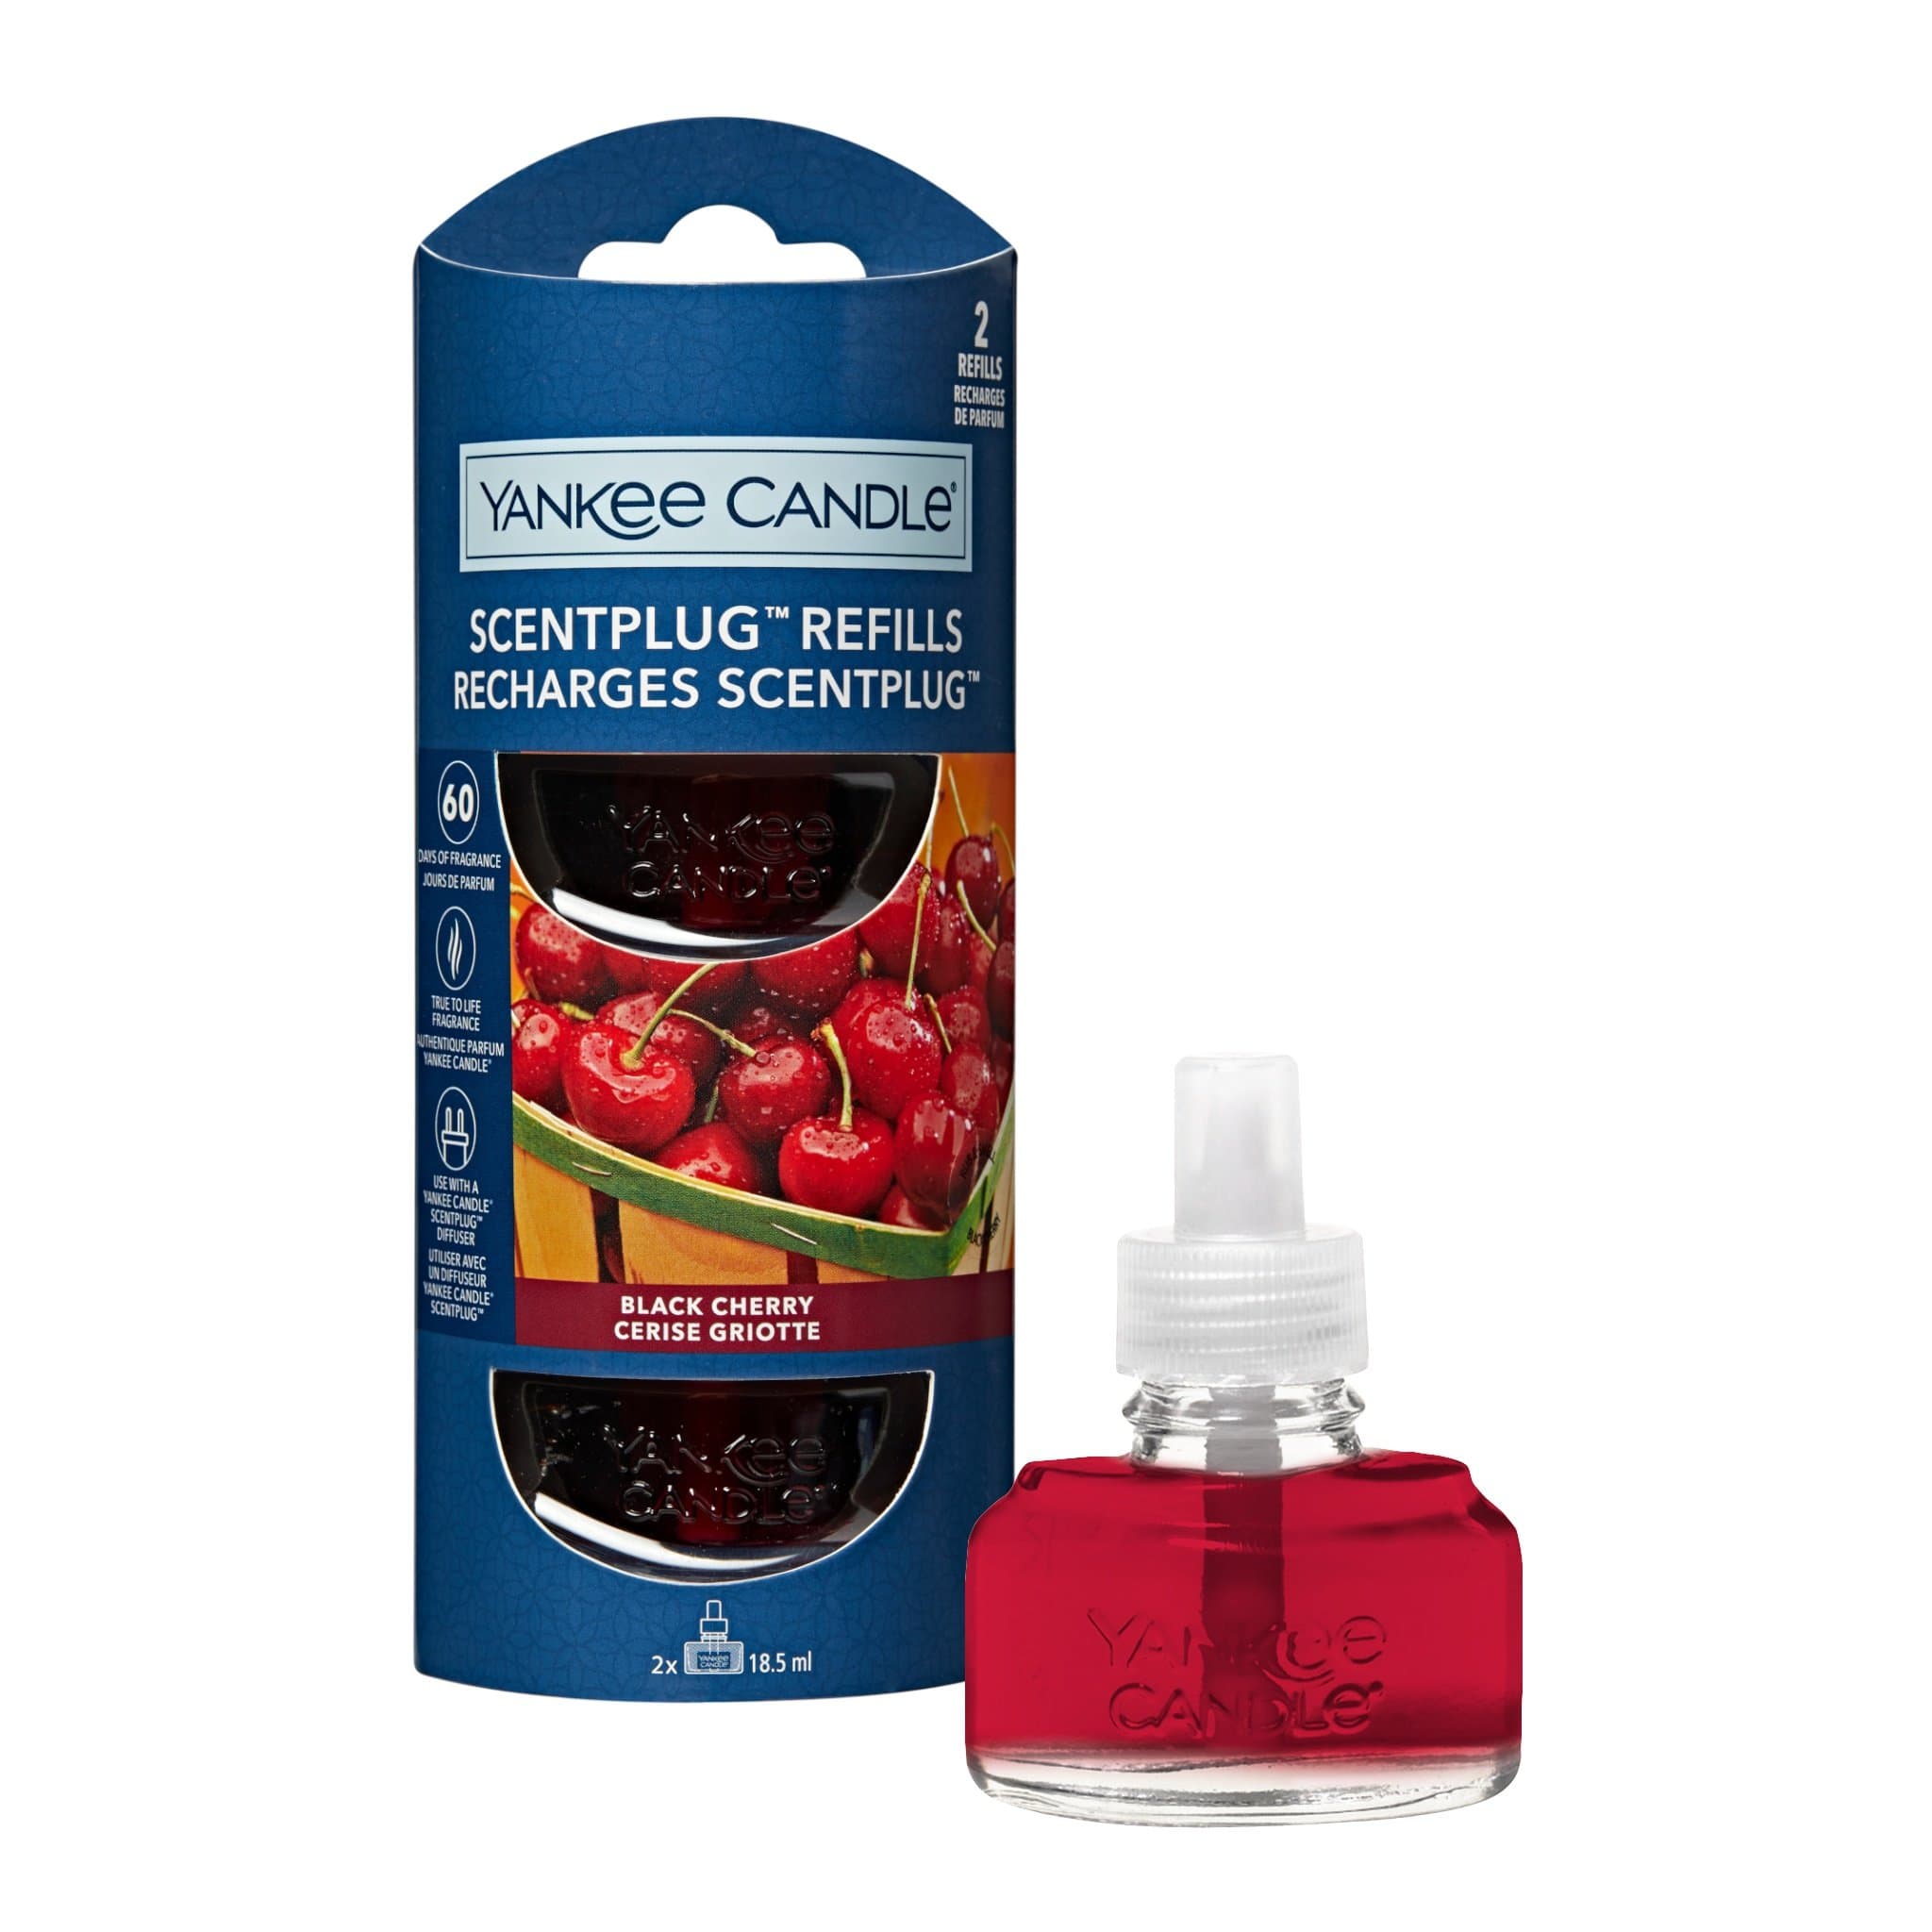 Yankee Candle Plug In Refill Yankee Candle Scentplug Refill Twin Pack - Black Cherry